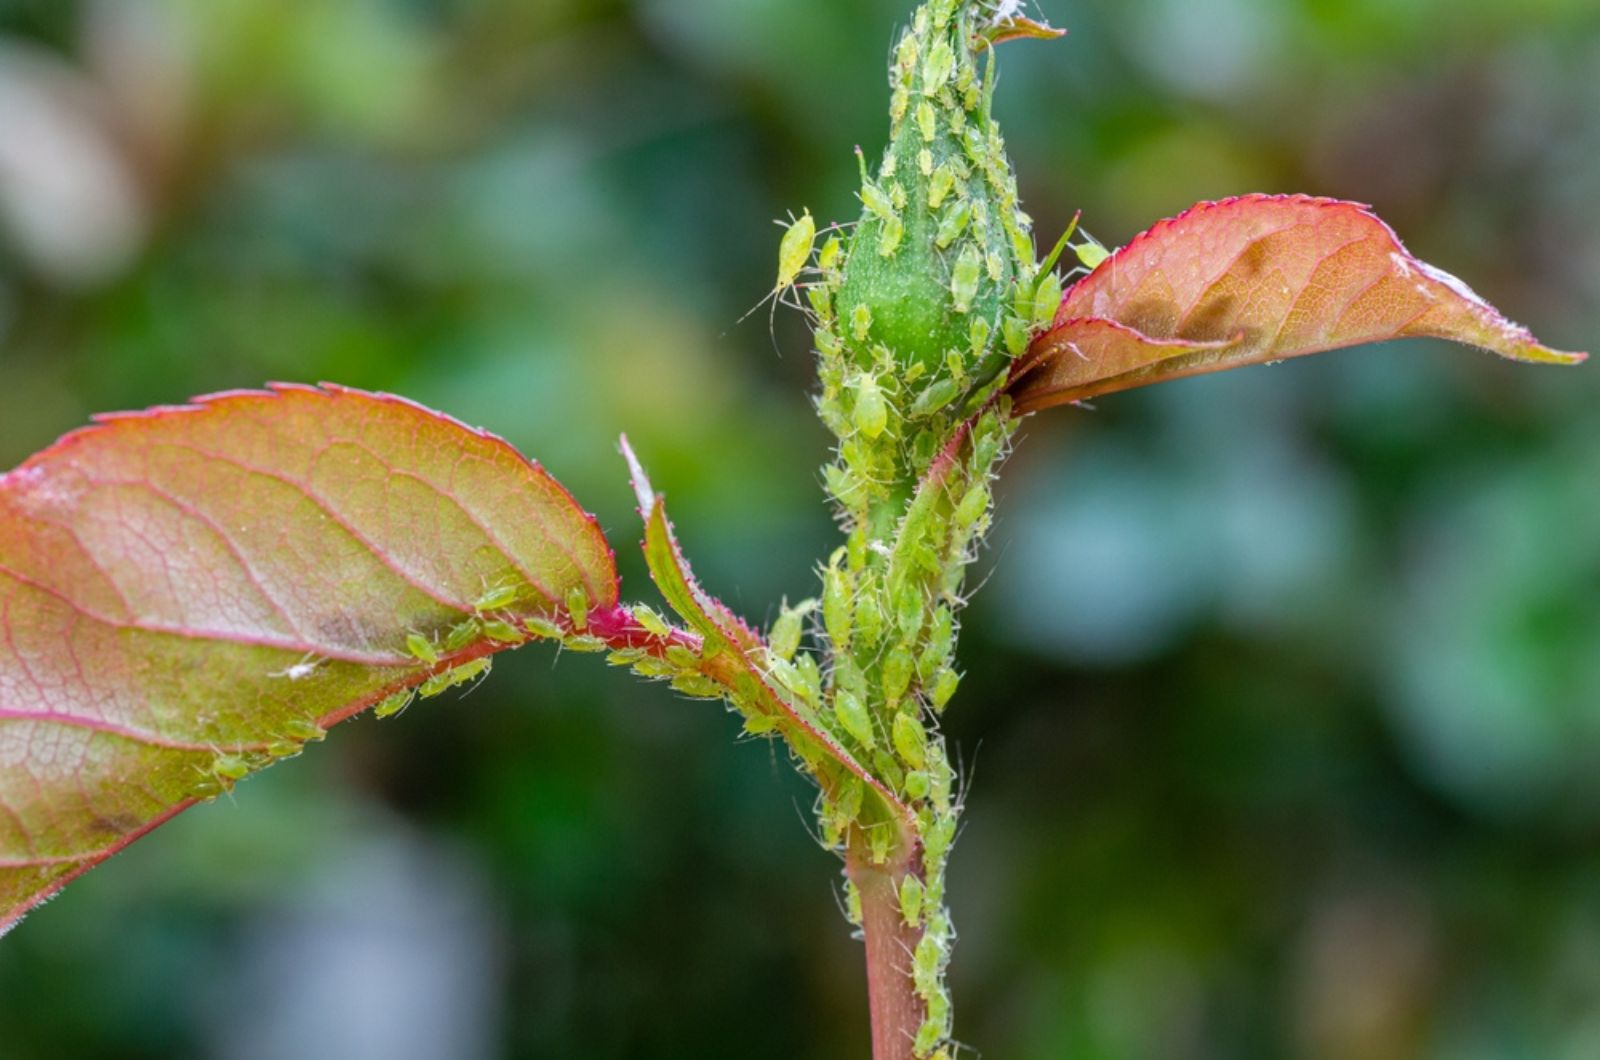 Colony of green aphids on a rose branch.